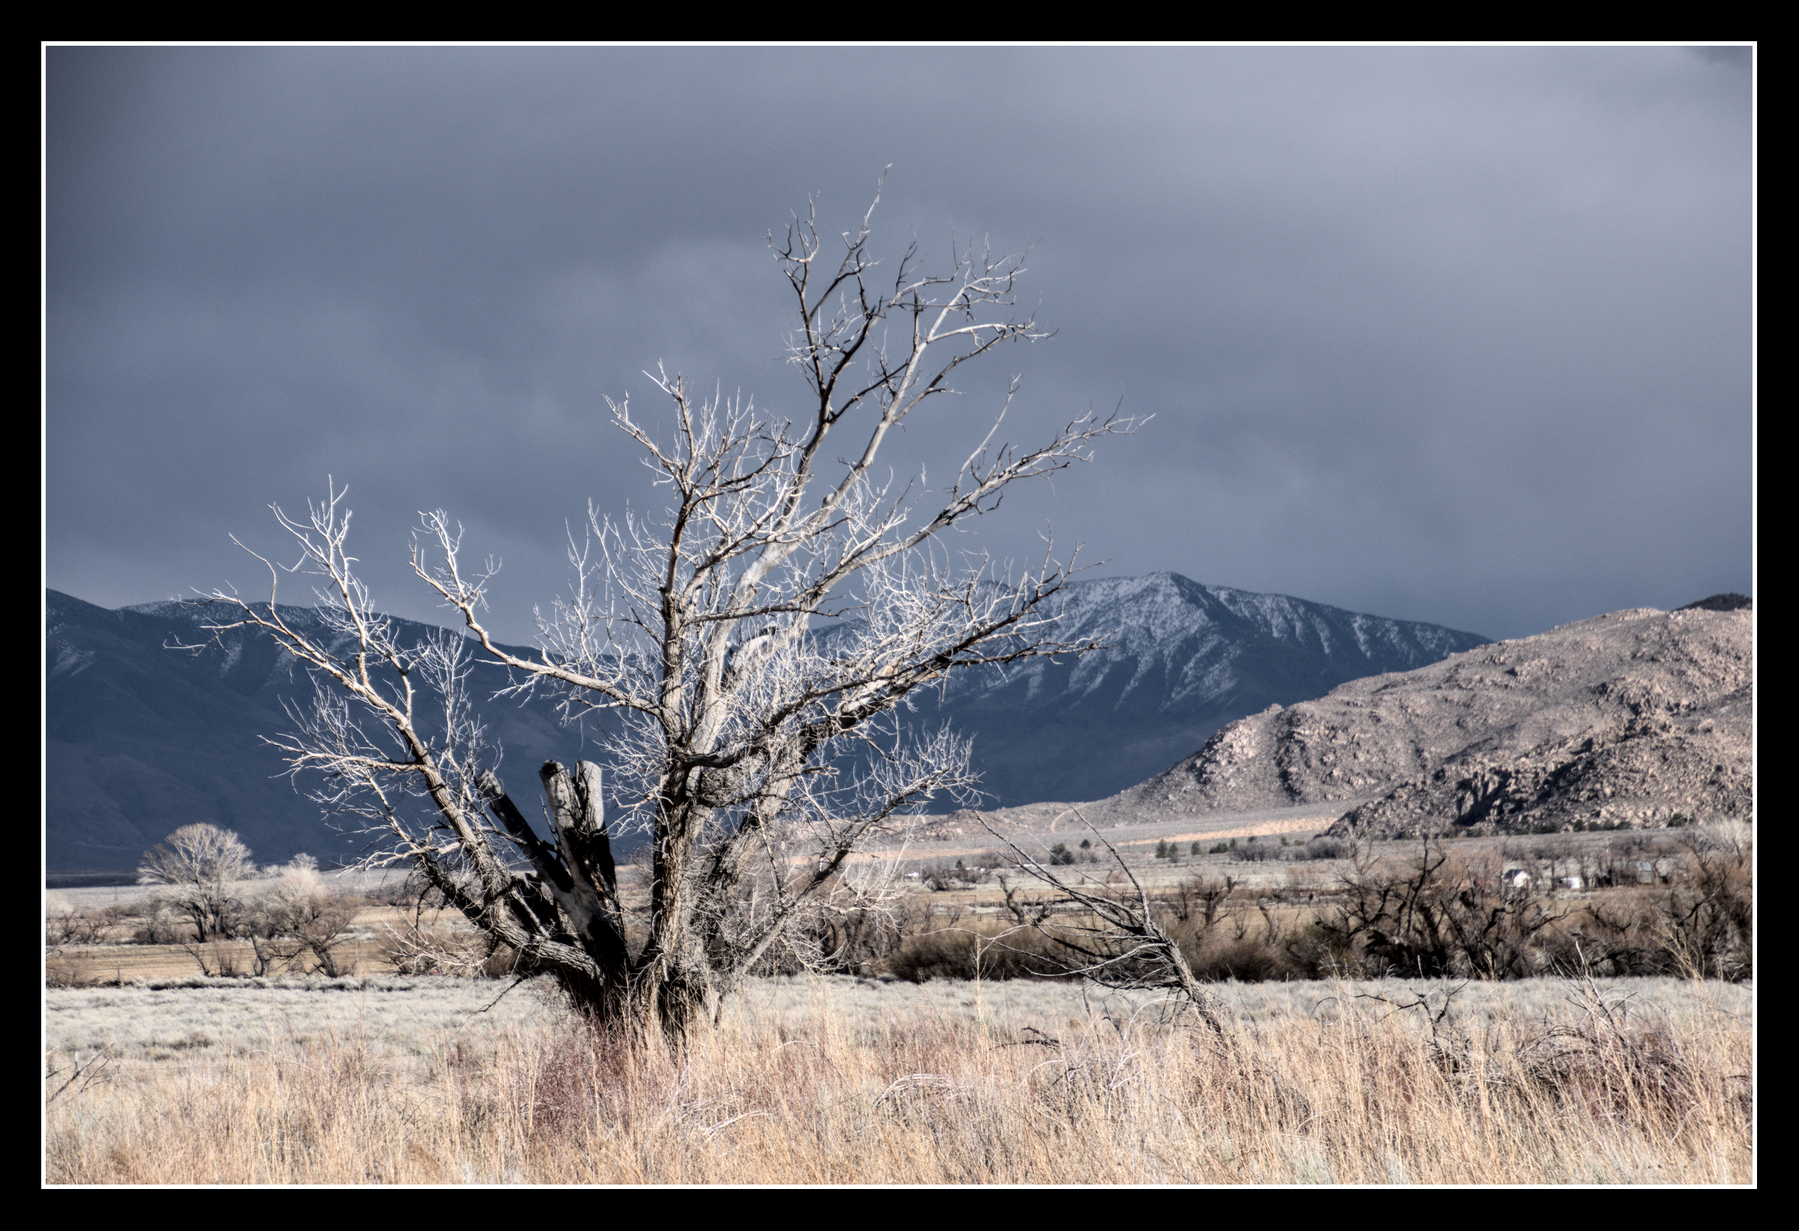 A tree that seems broken and dead stands amidst dry desert scrub and grass, with mountains in the background and cloudy skies in the distance. Afternoon sun lights the foreground.